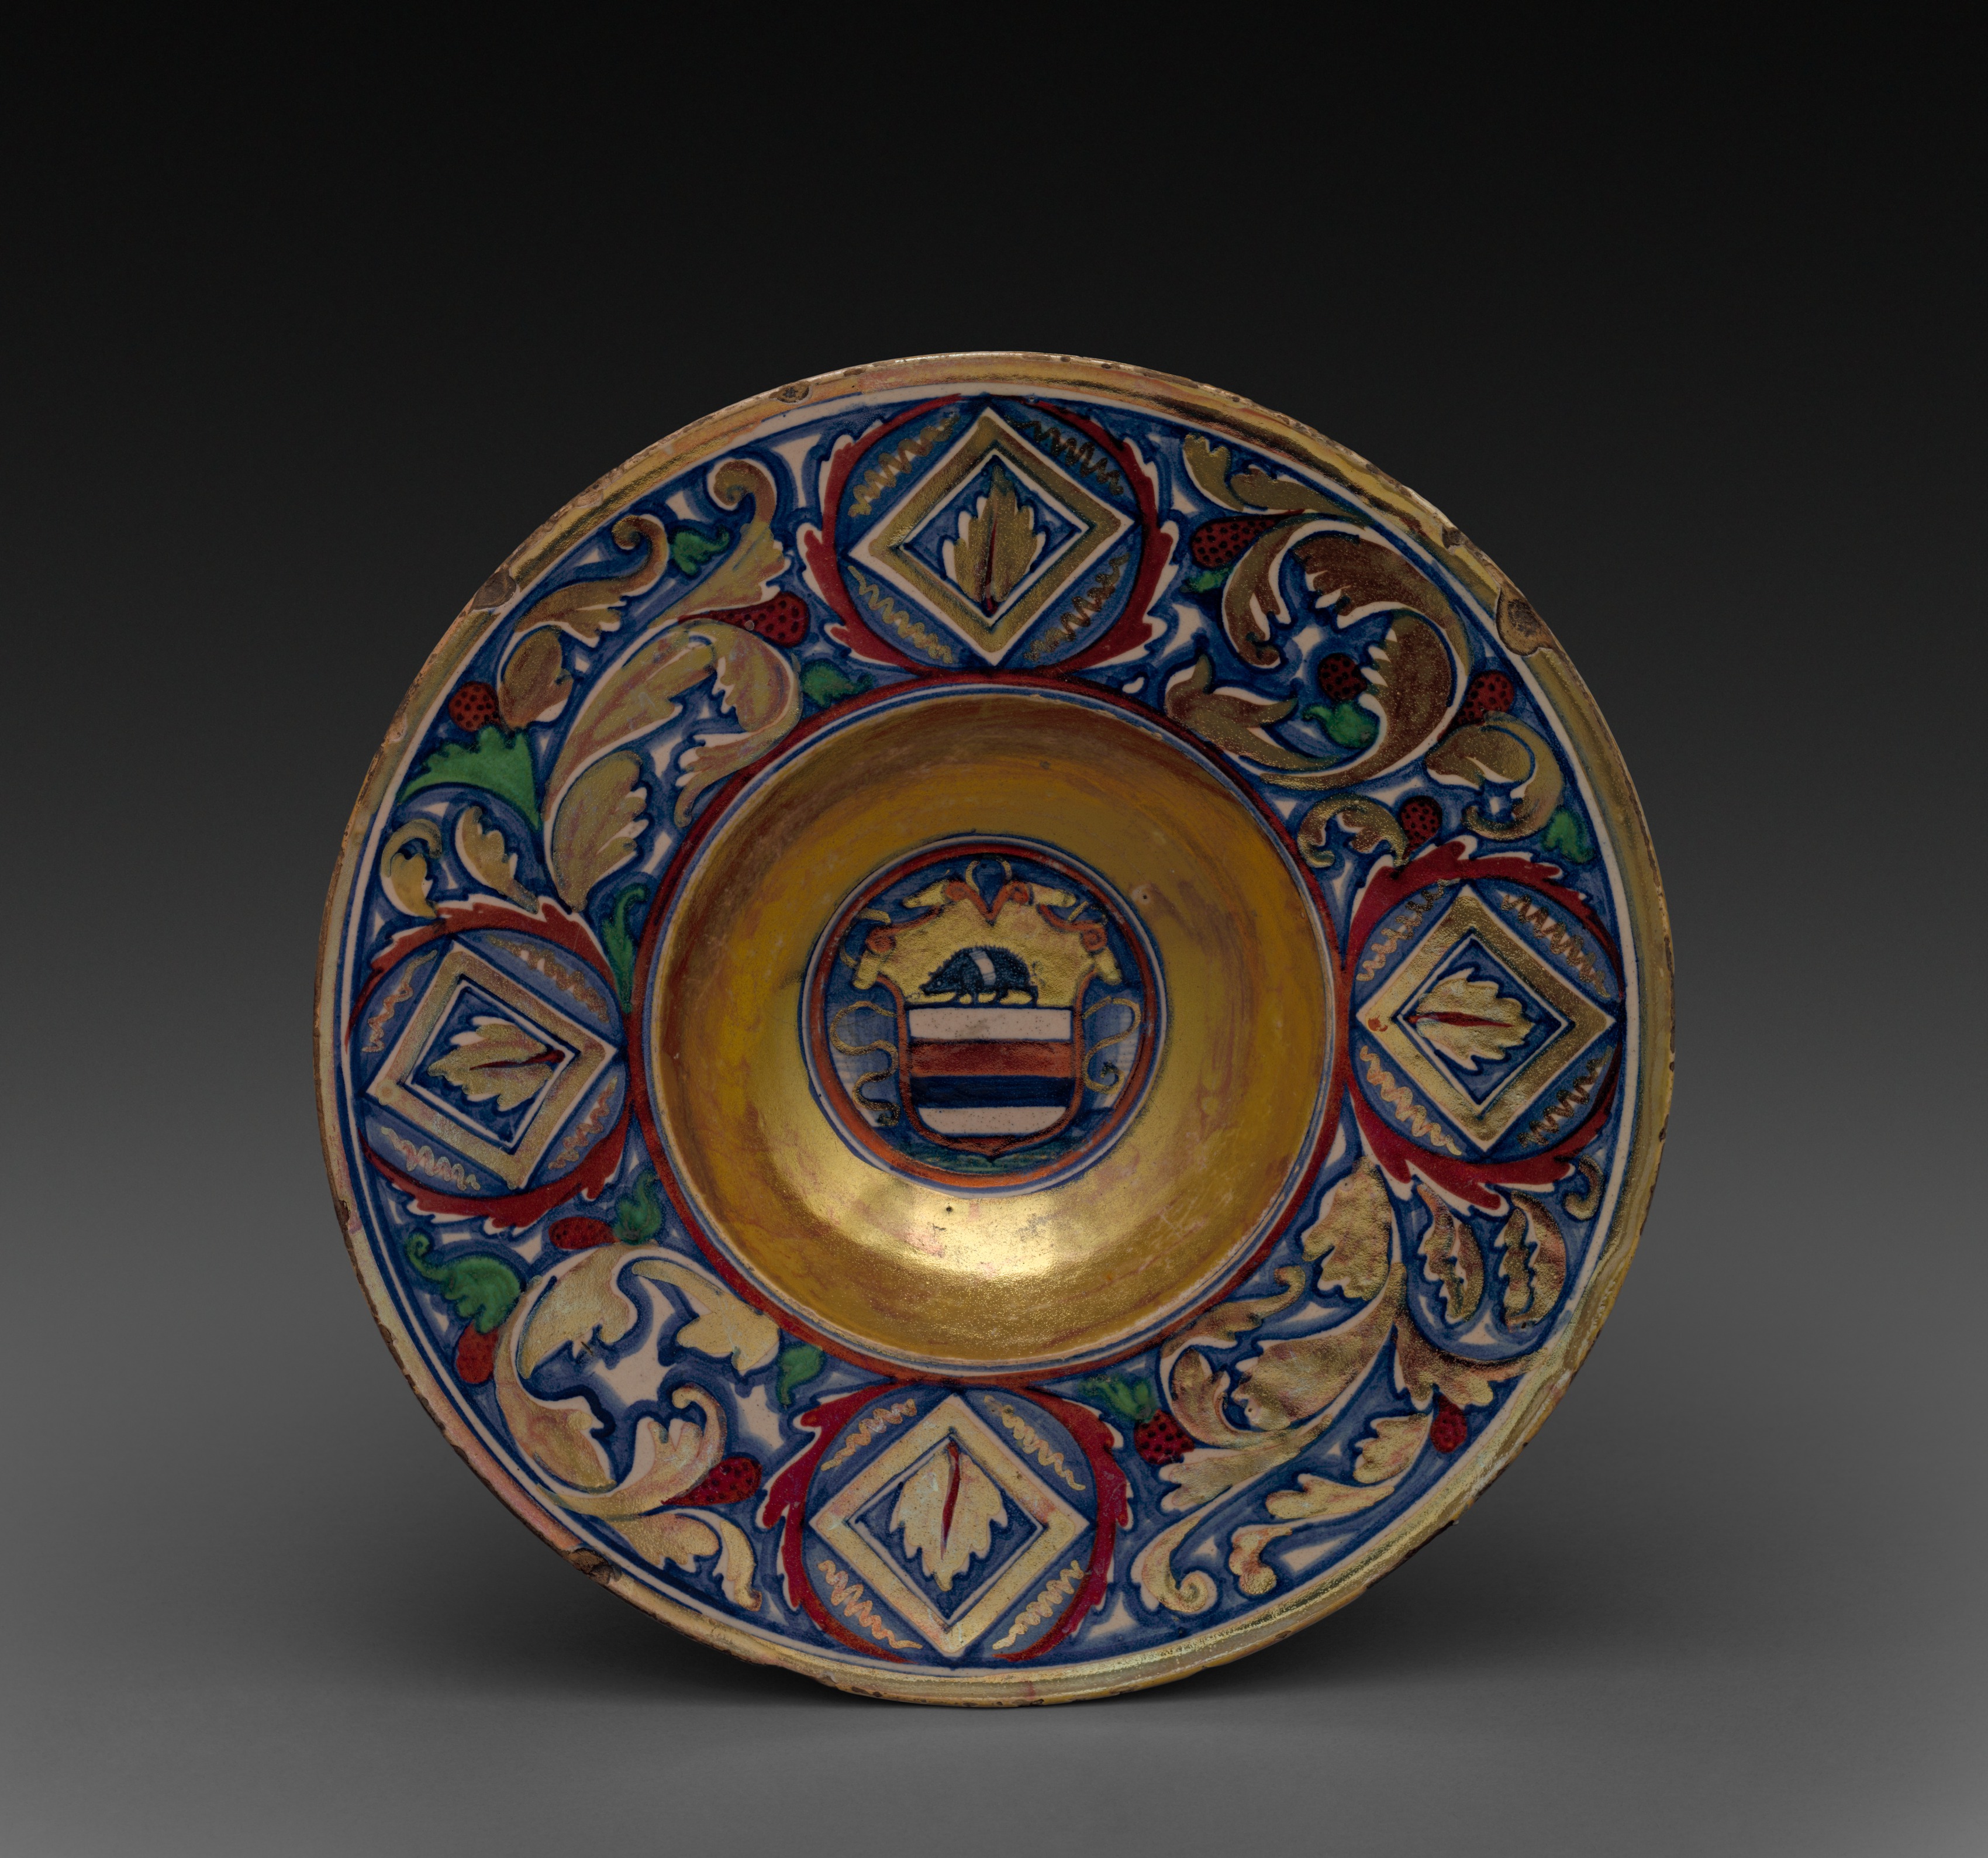 Plate with the Arms of the Rizzardi Family of Venice